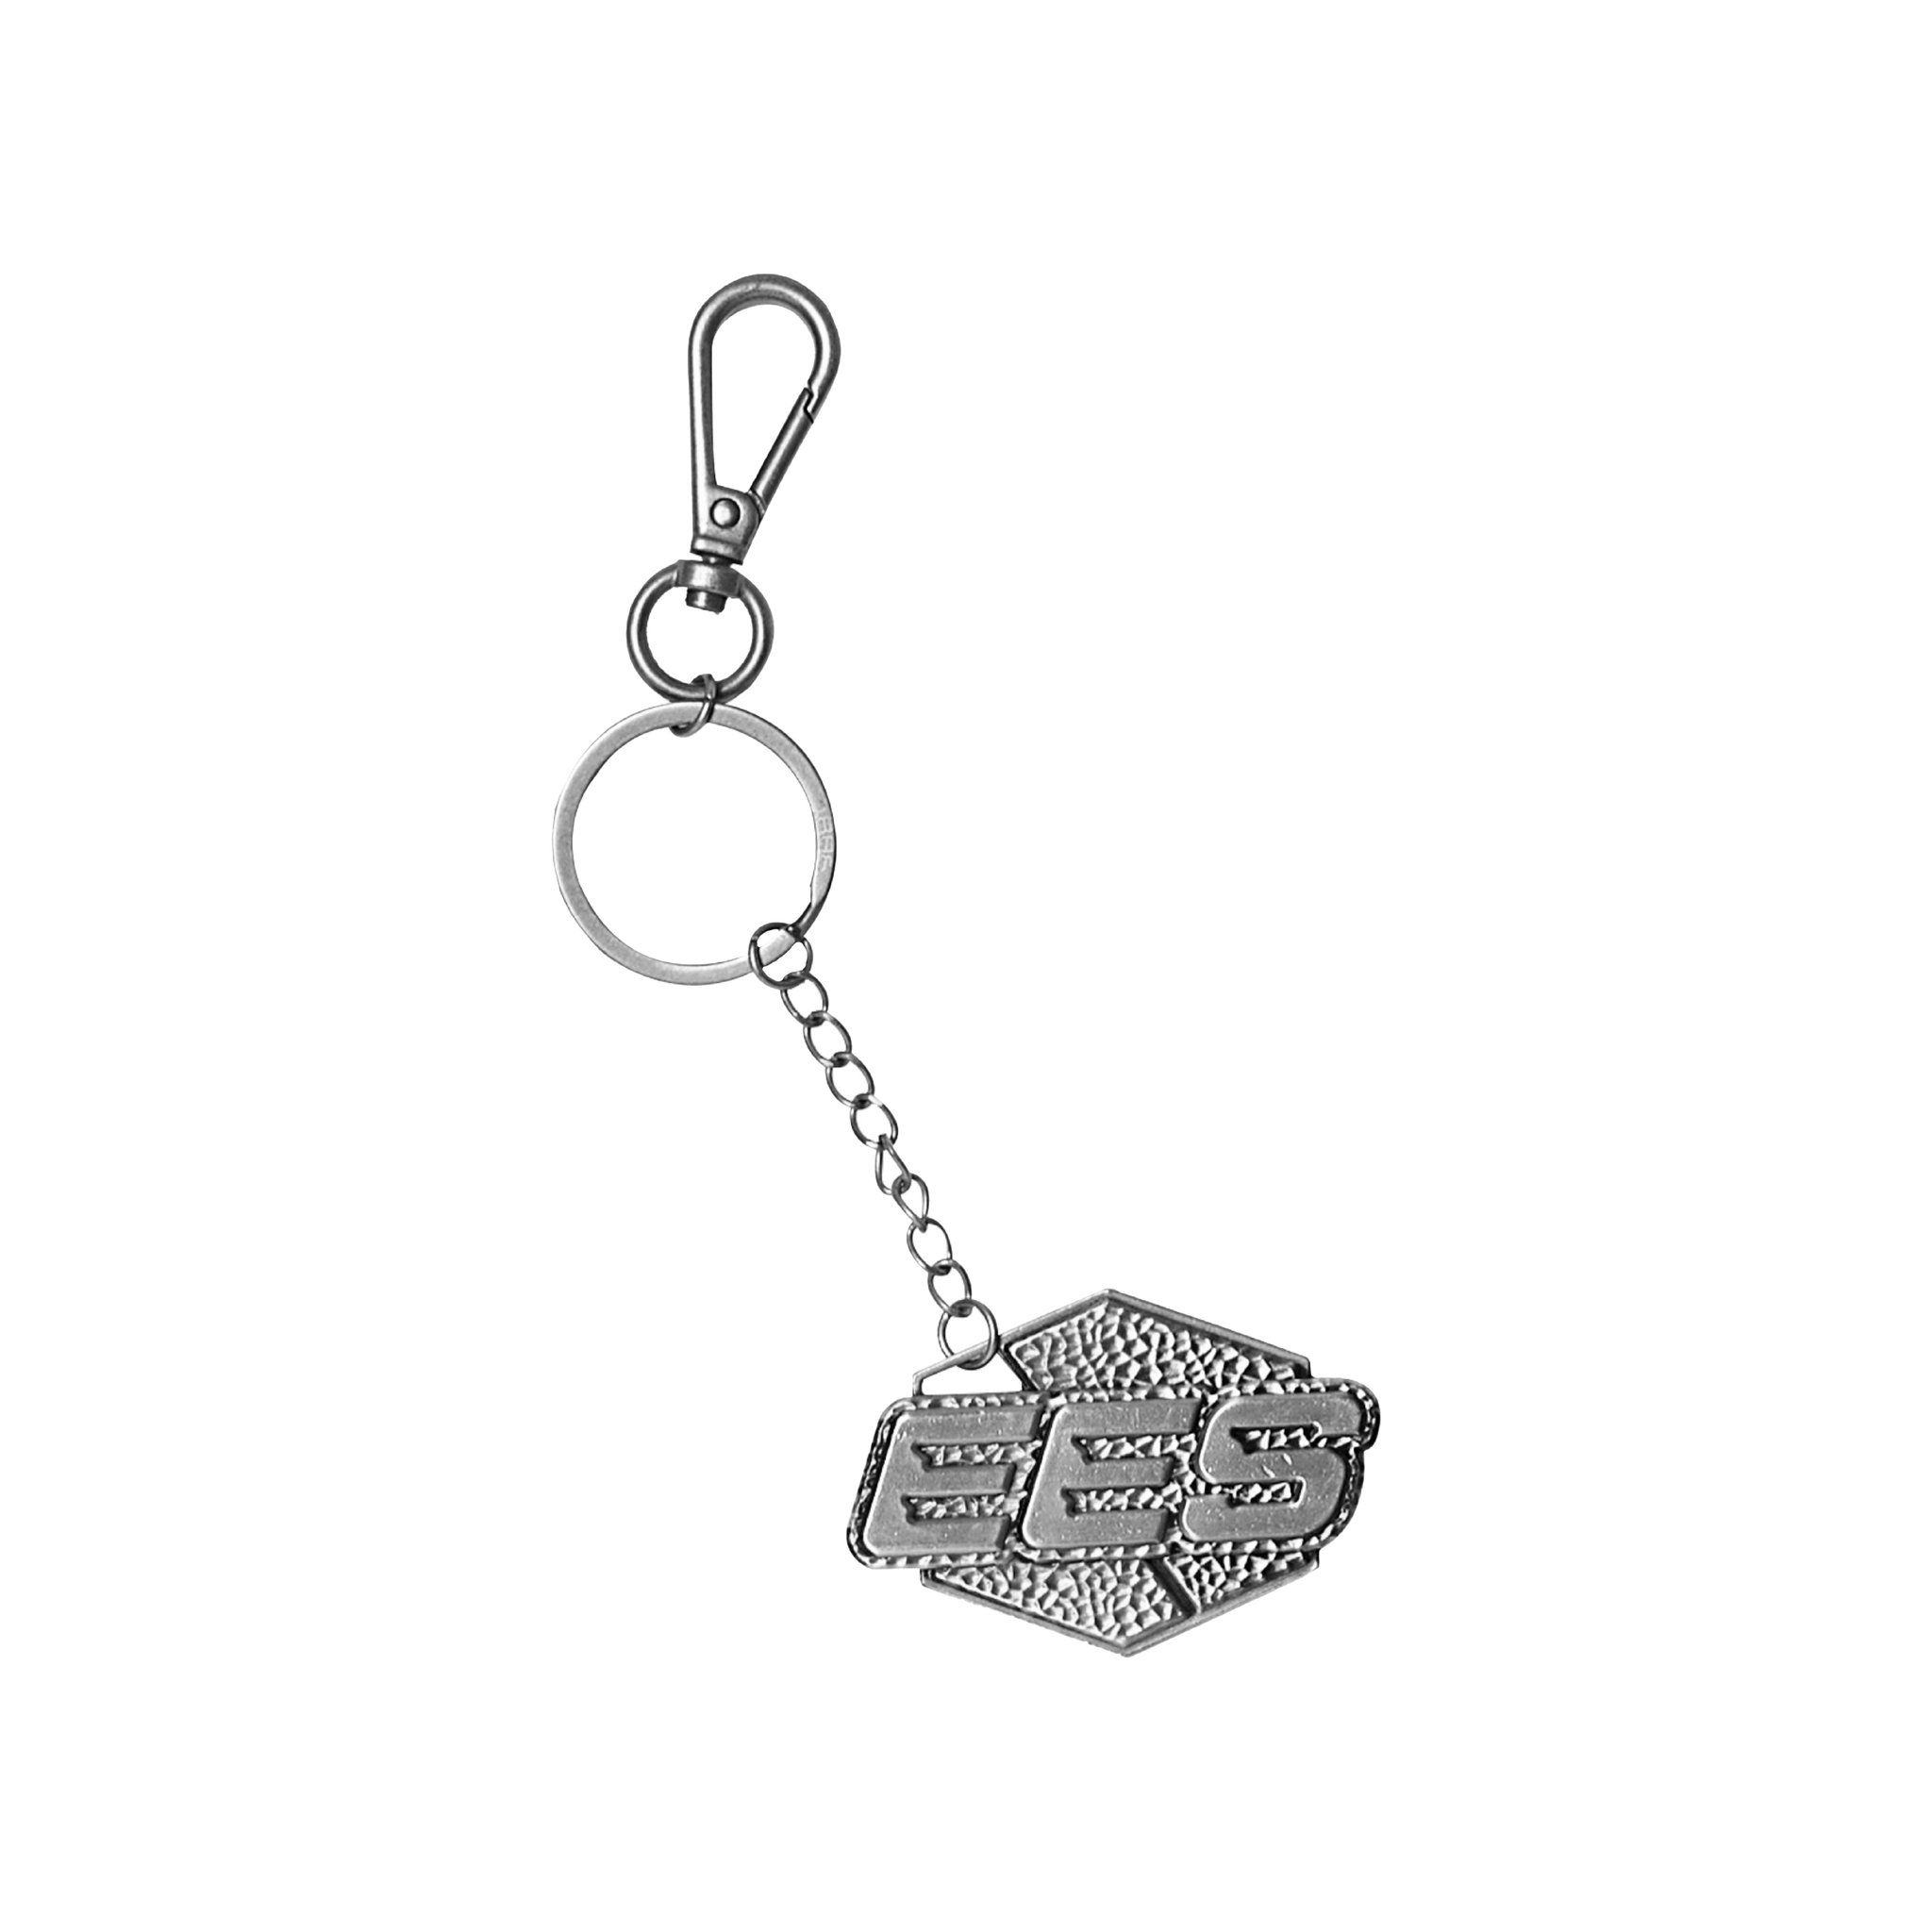 EES Keychain - SILVER